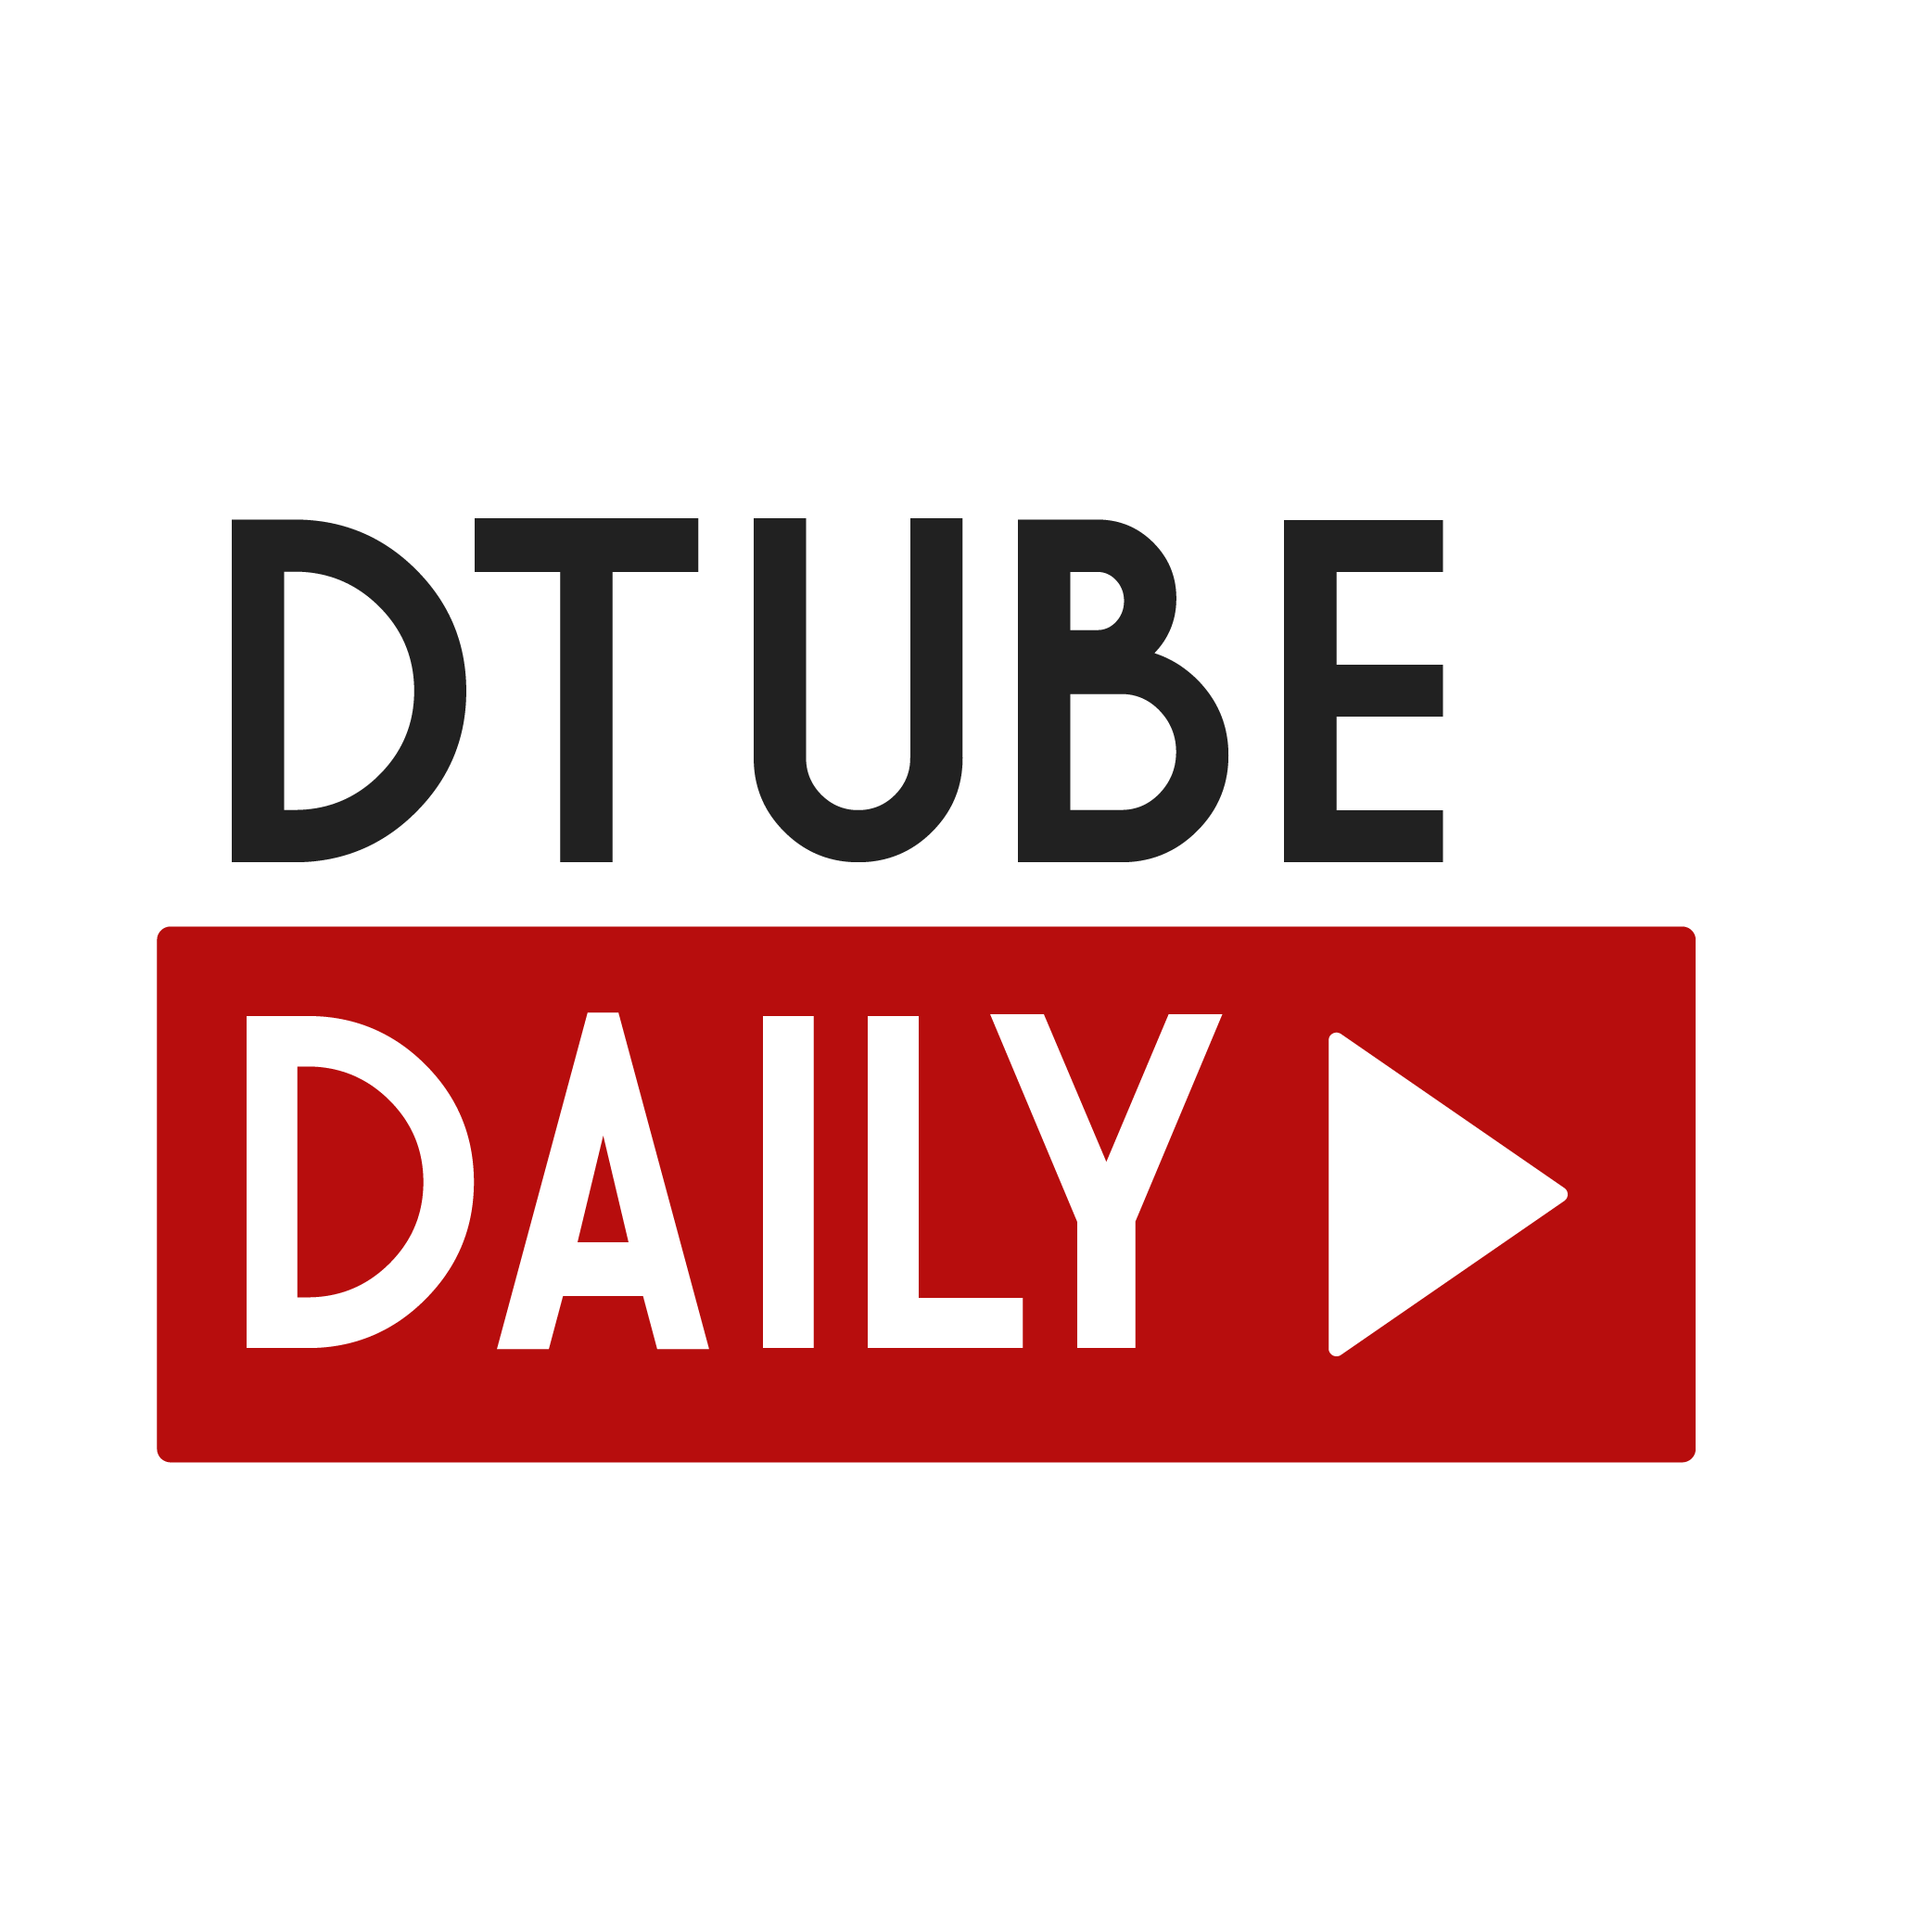 dtube daily-2-01.png